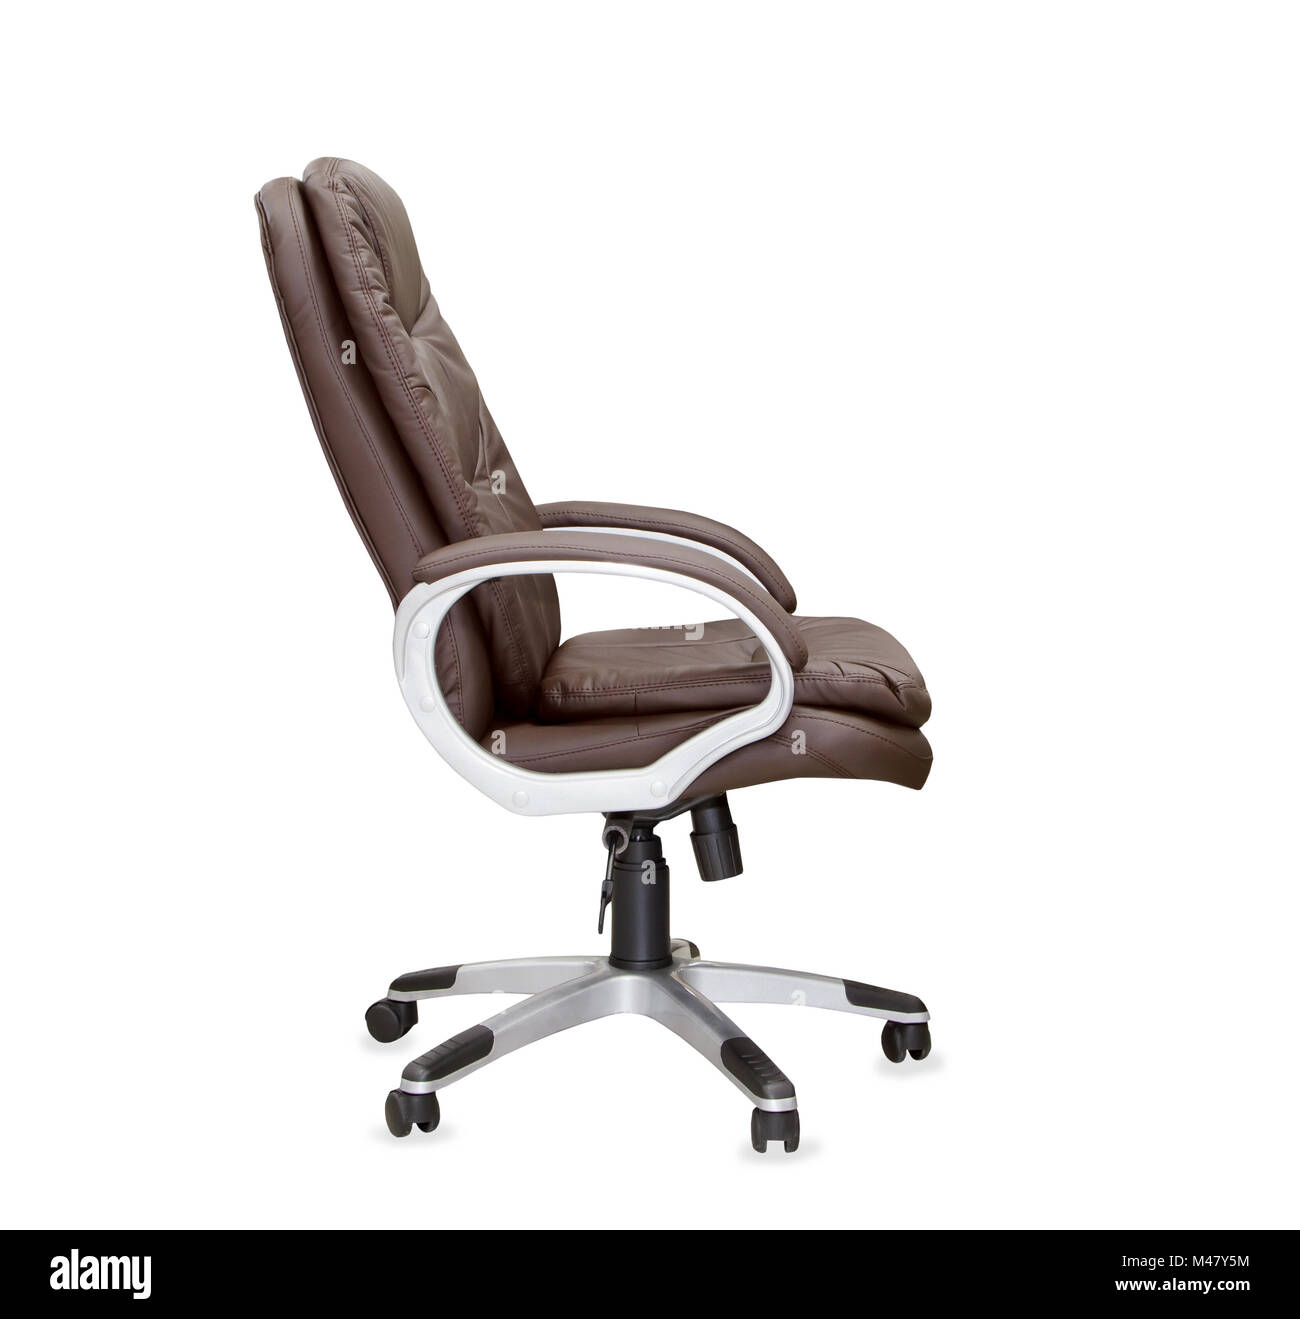 The profile view of office chair from brown leather. Isolated Stock Photo